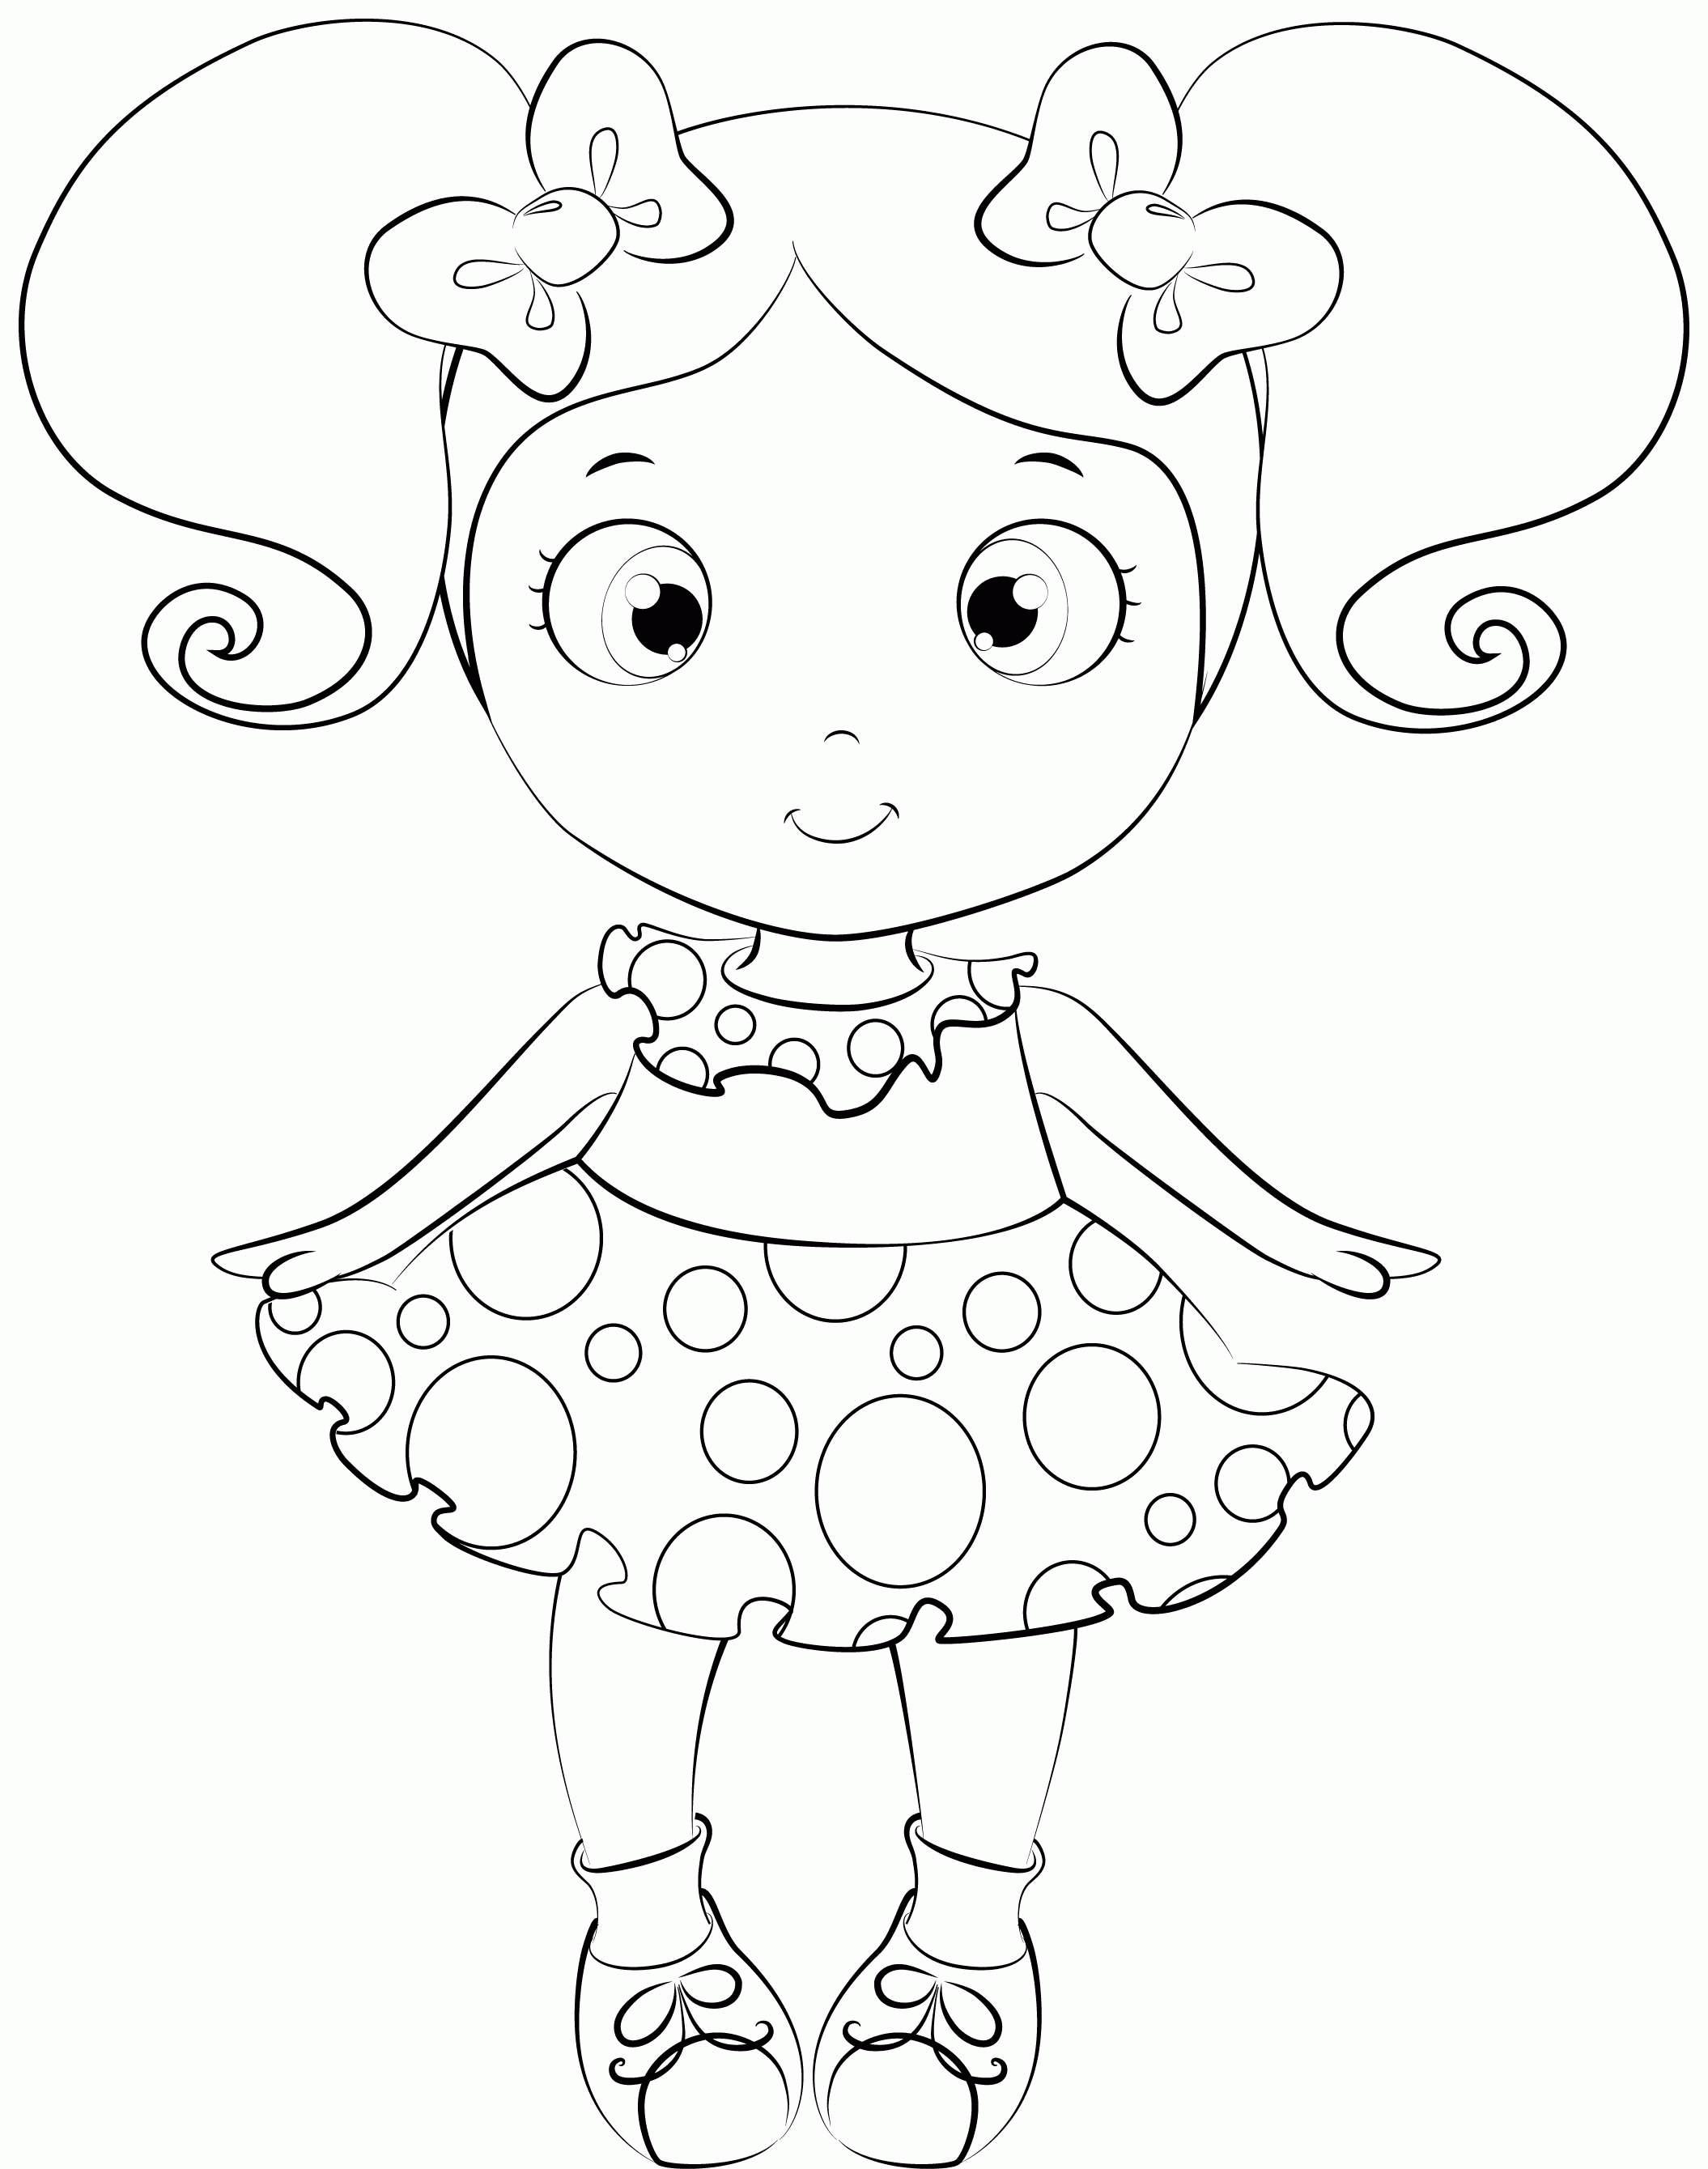 Easy Drawing Guides - Learn How to Draw a Doll: Easy Step-by-Step Drawing  Tutorial for Kids and Beginners. #Doll #drawingtutorial #easydrawing. See  the full tutorial at https://bit.ly/3fVmfmm . | Facebook